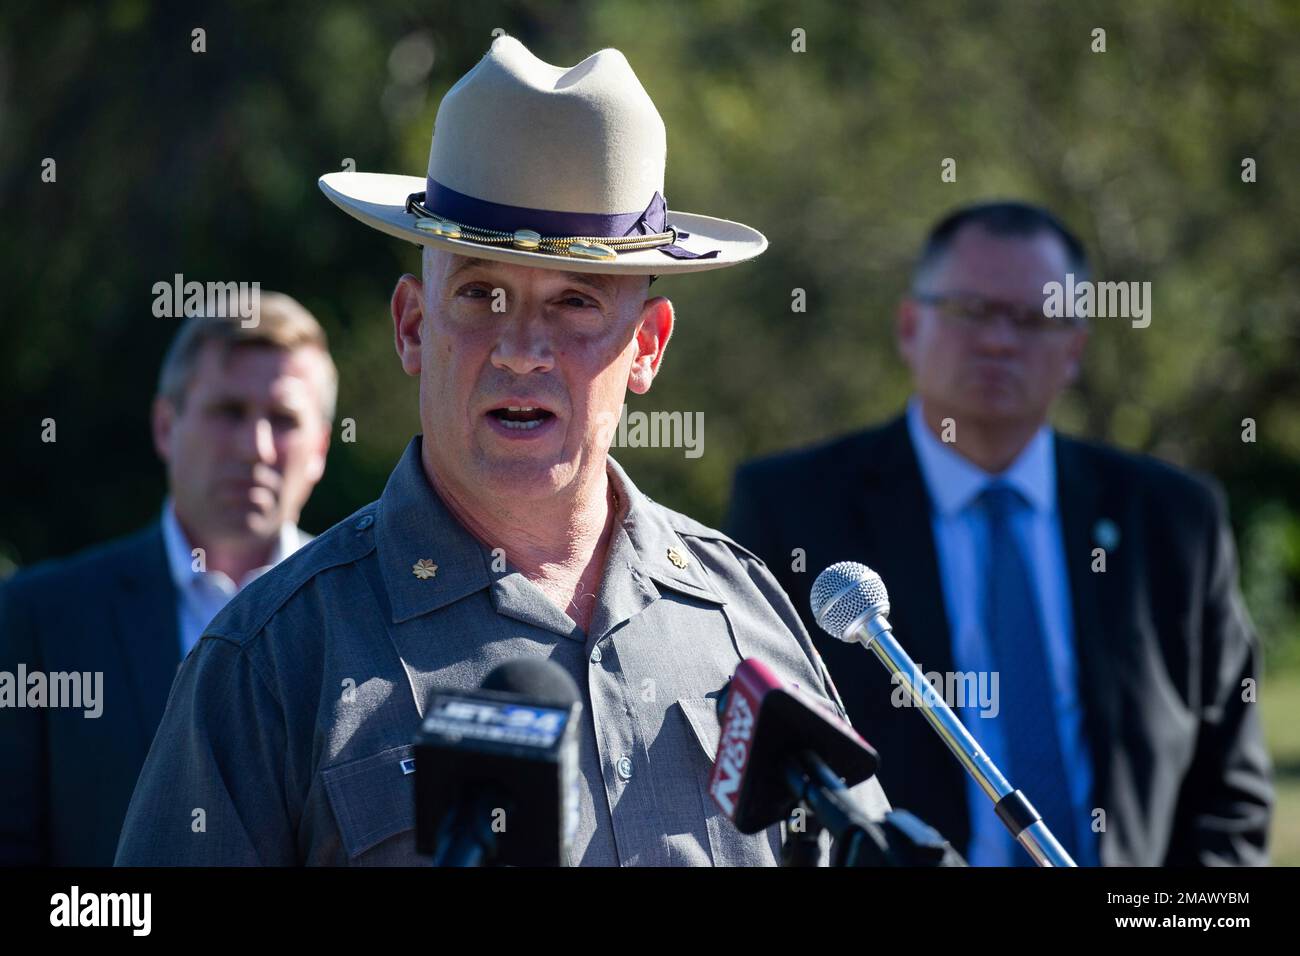 New York State Patrol Commander Major Eugene Staniszewski, speaks about the Salman Rushdie attack during a press conference outside a New York State Police station in Jamestown, N.Y., Friday, image